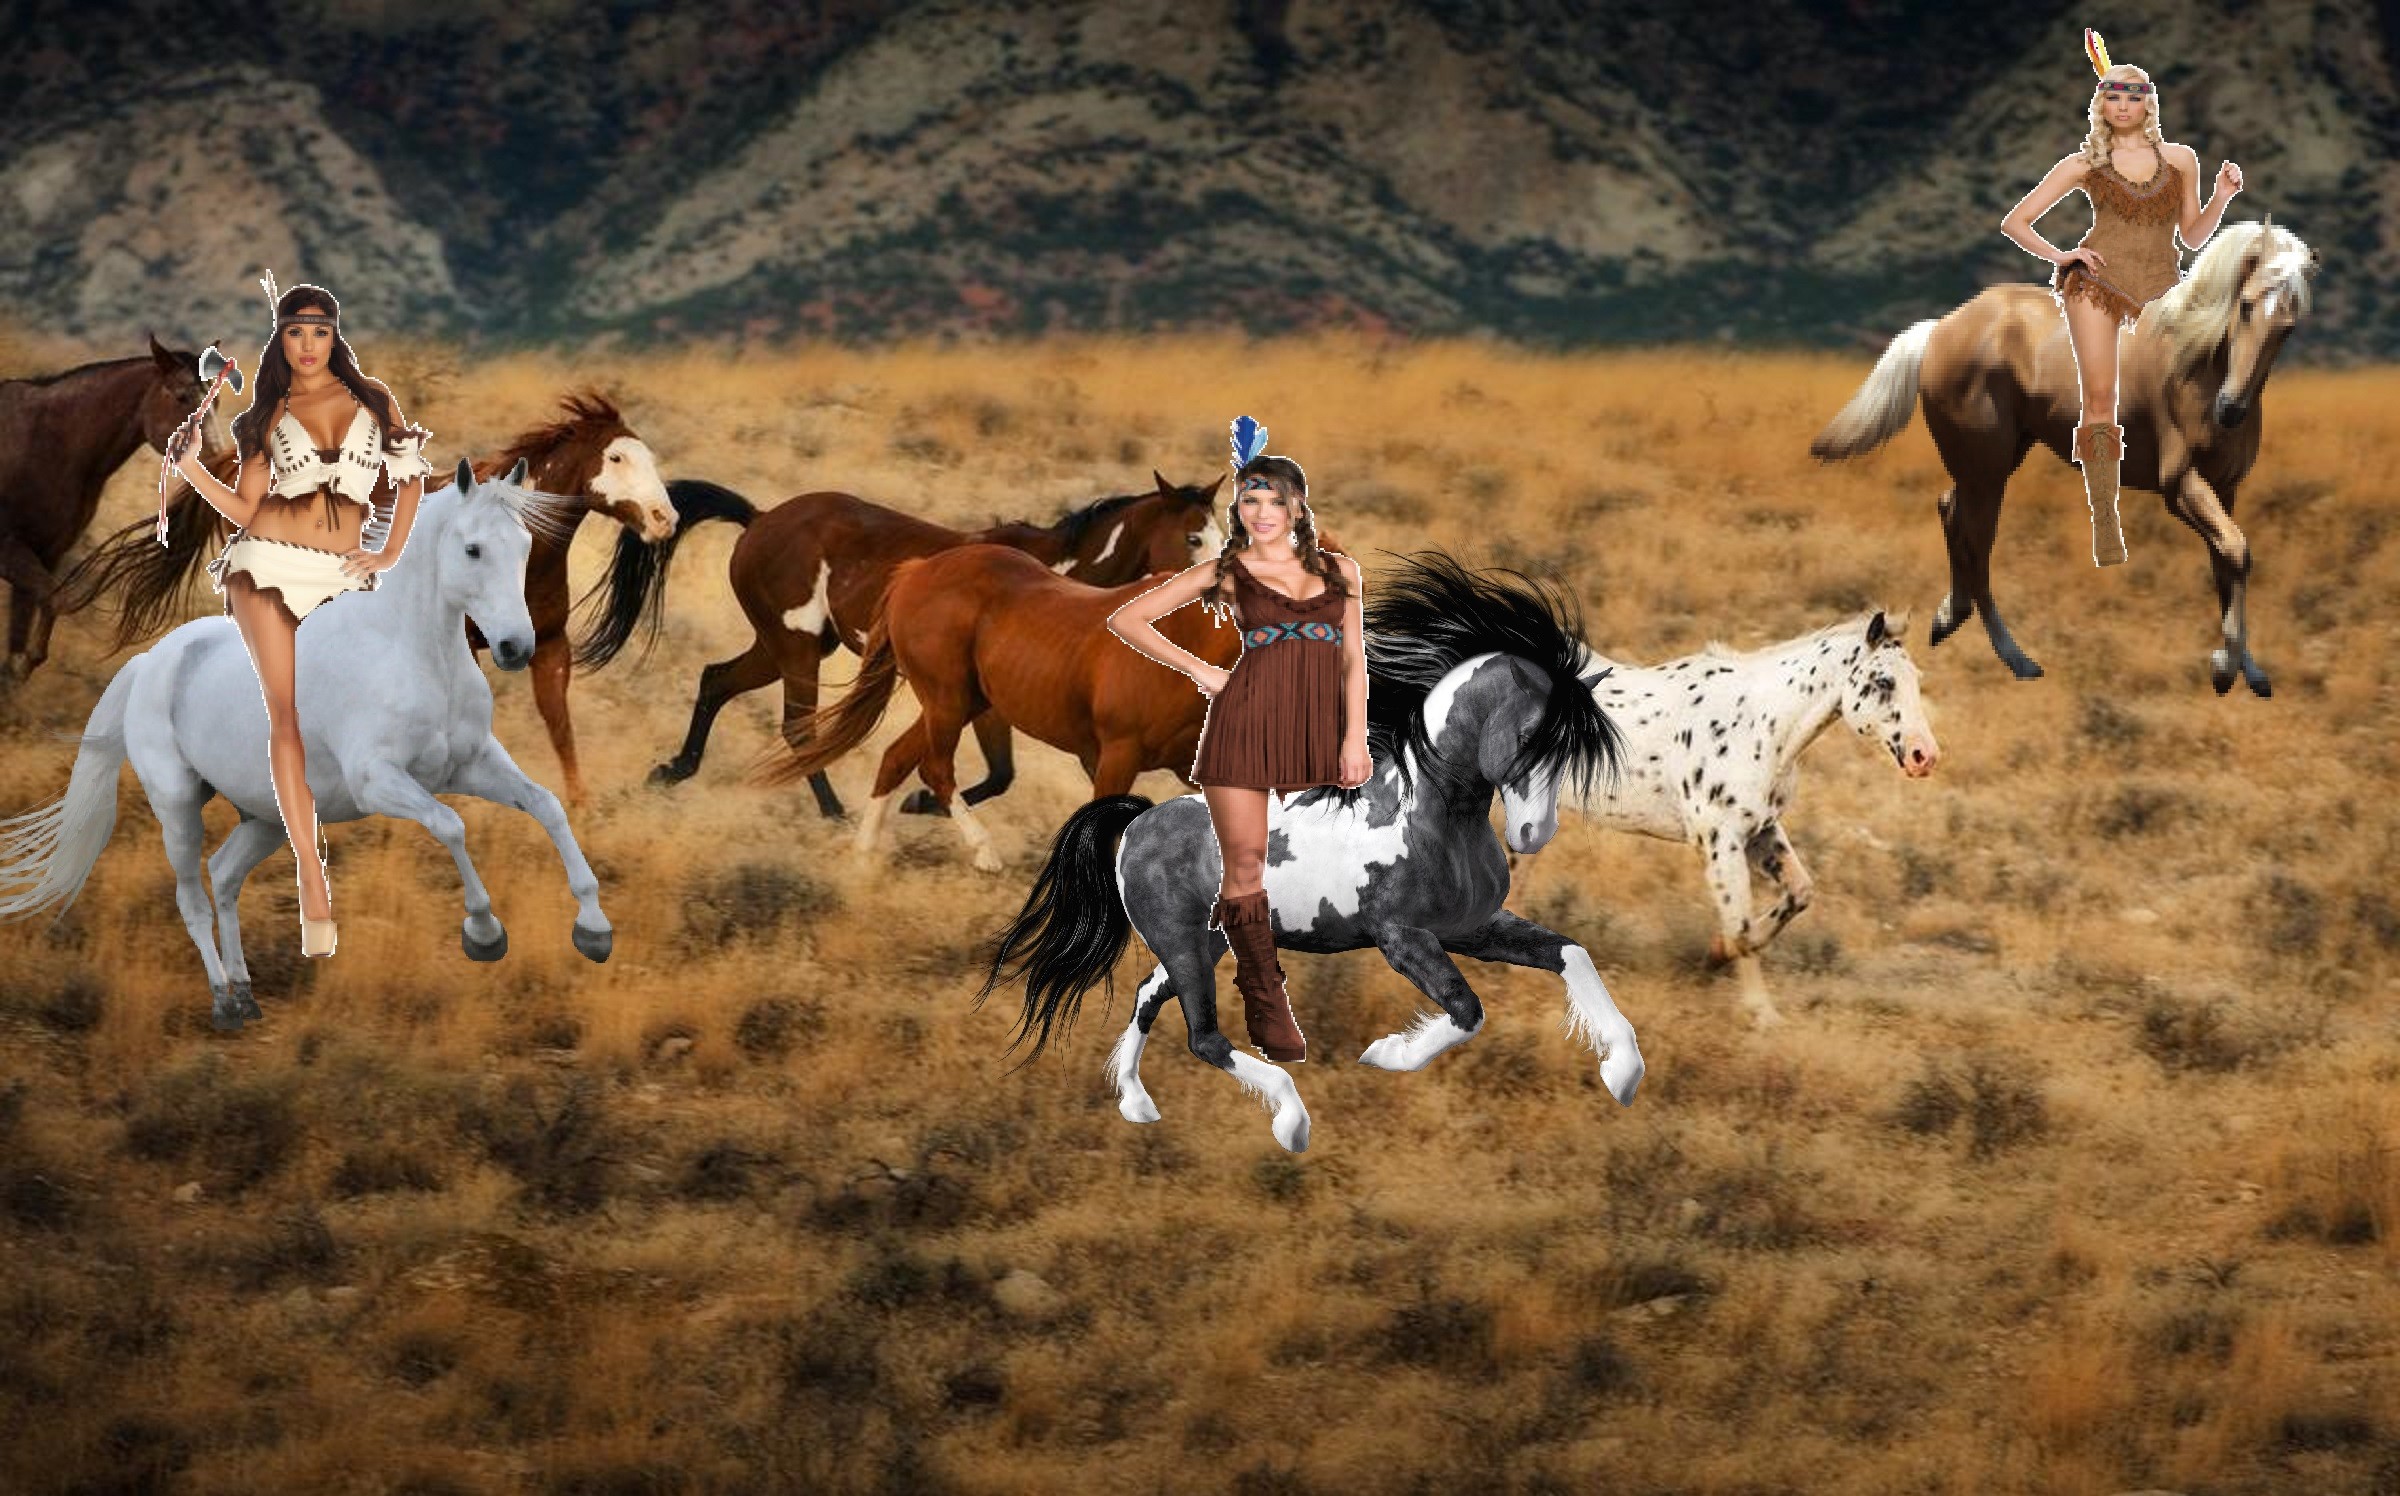 2400x1496 Native Americans images 3 hot brave native american women riding their  beautiful horses to roundup and tame a herd of wild h HD wallpaper and  background ...